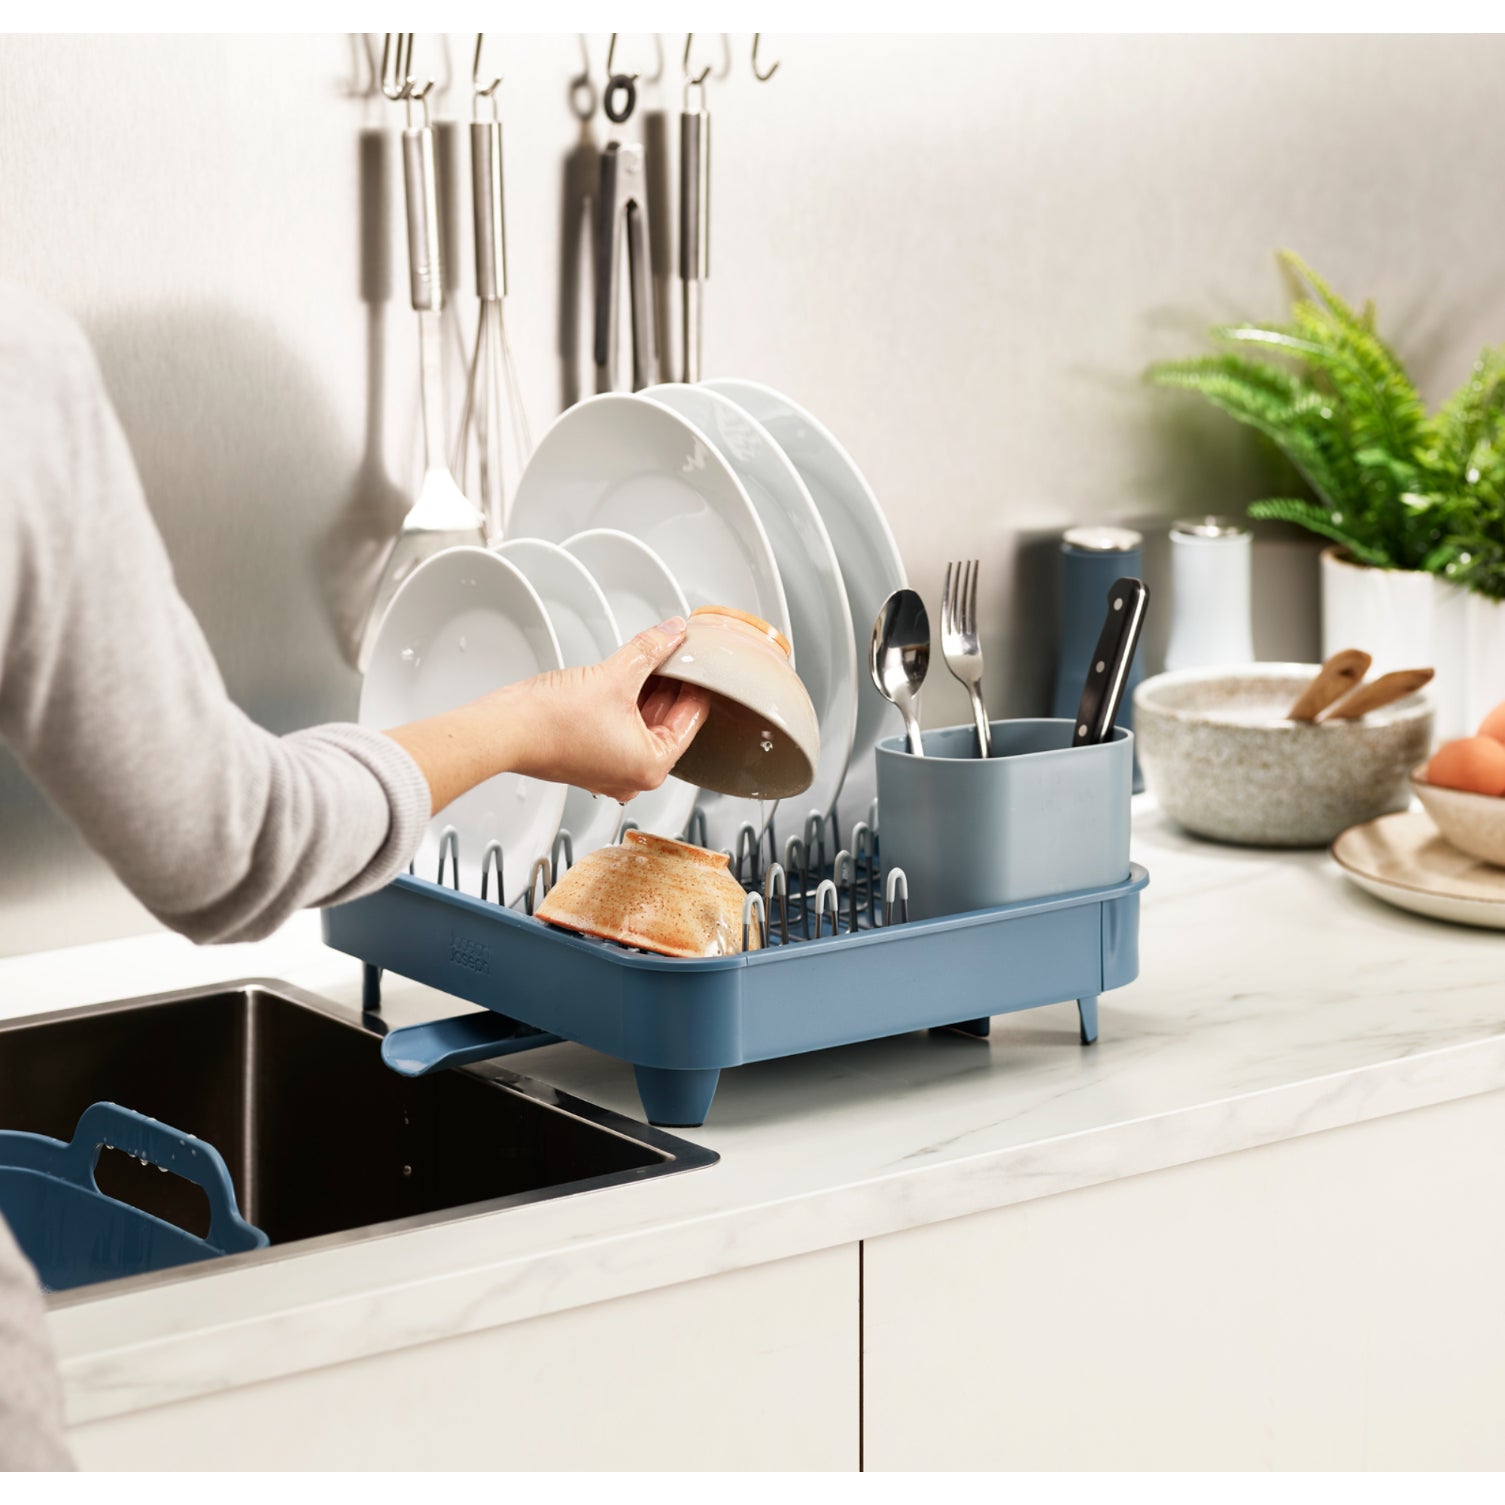 Extend Expandable Dish Rack with Draining Plug - Sky